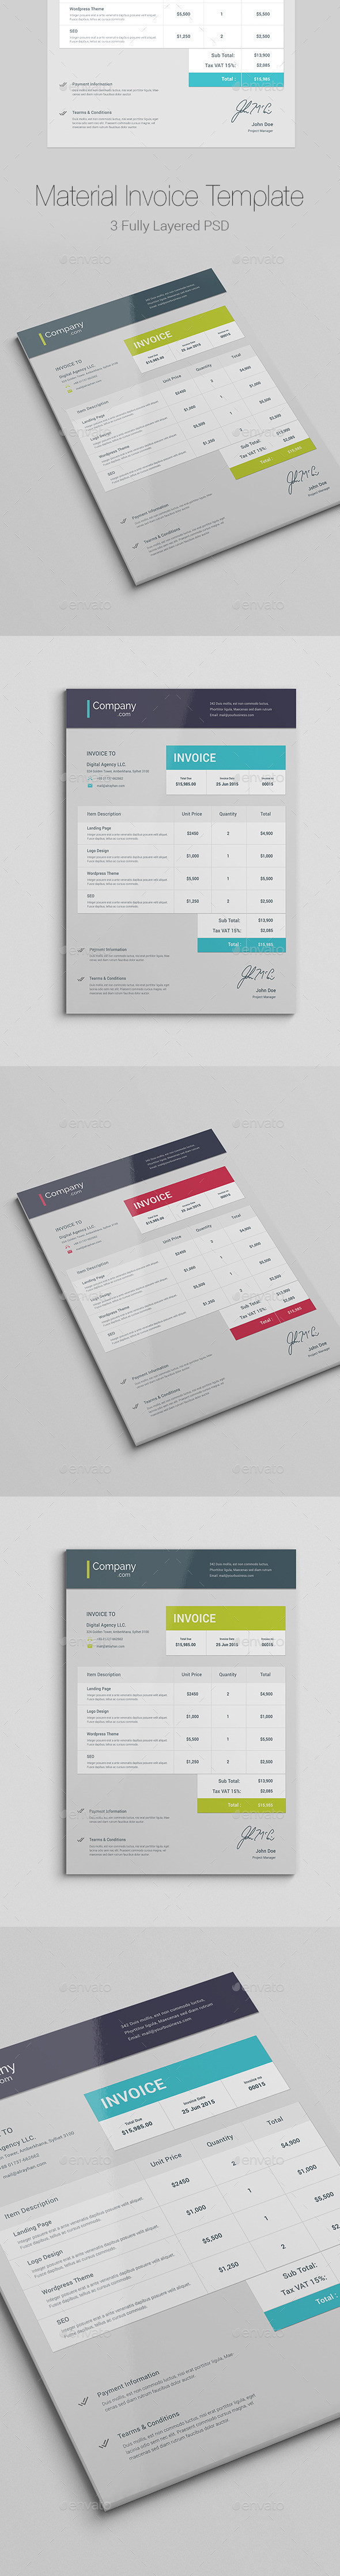 Preview material financial invoice template